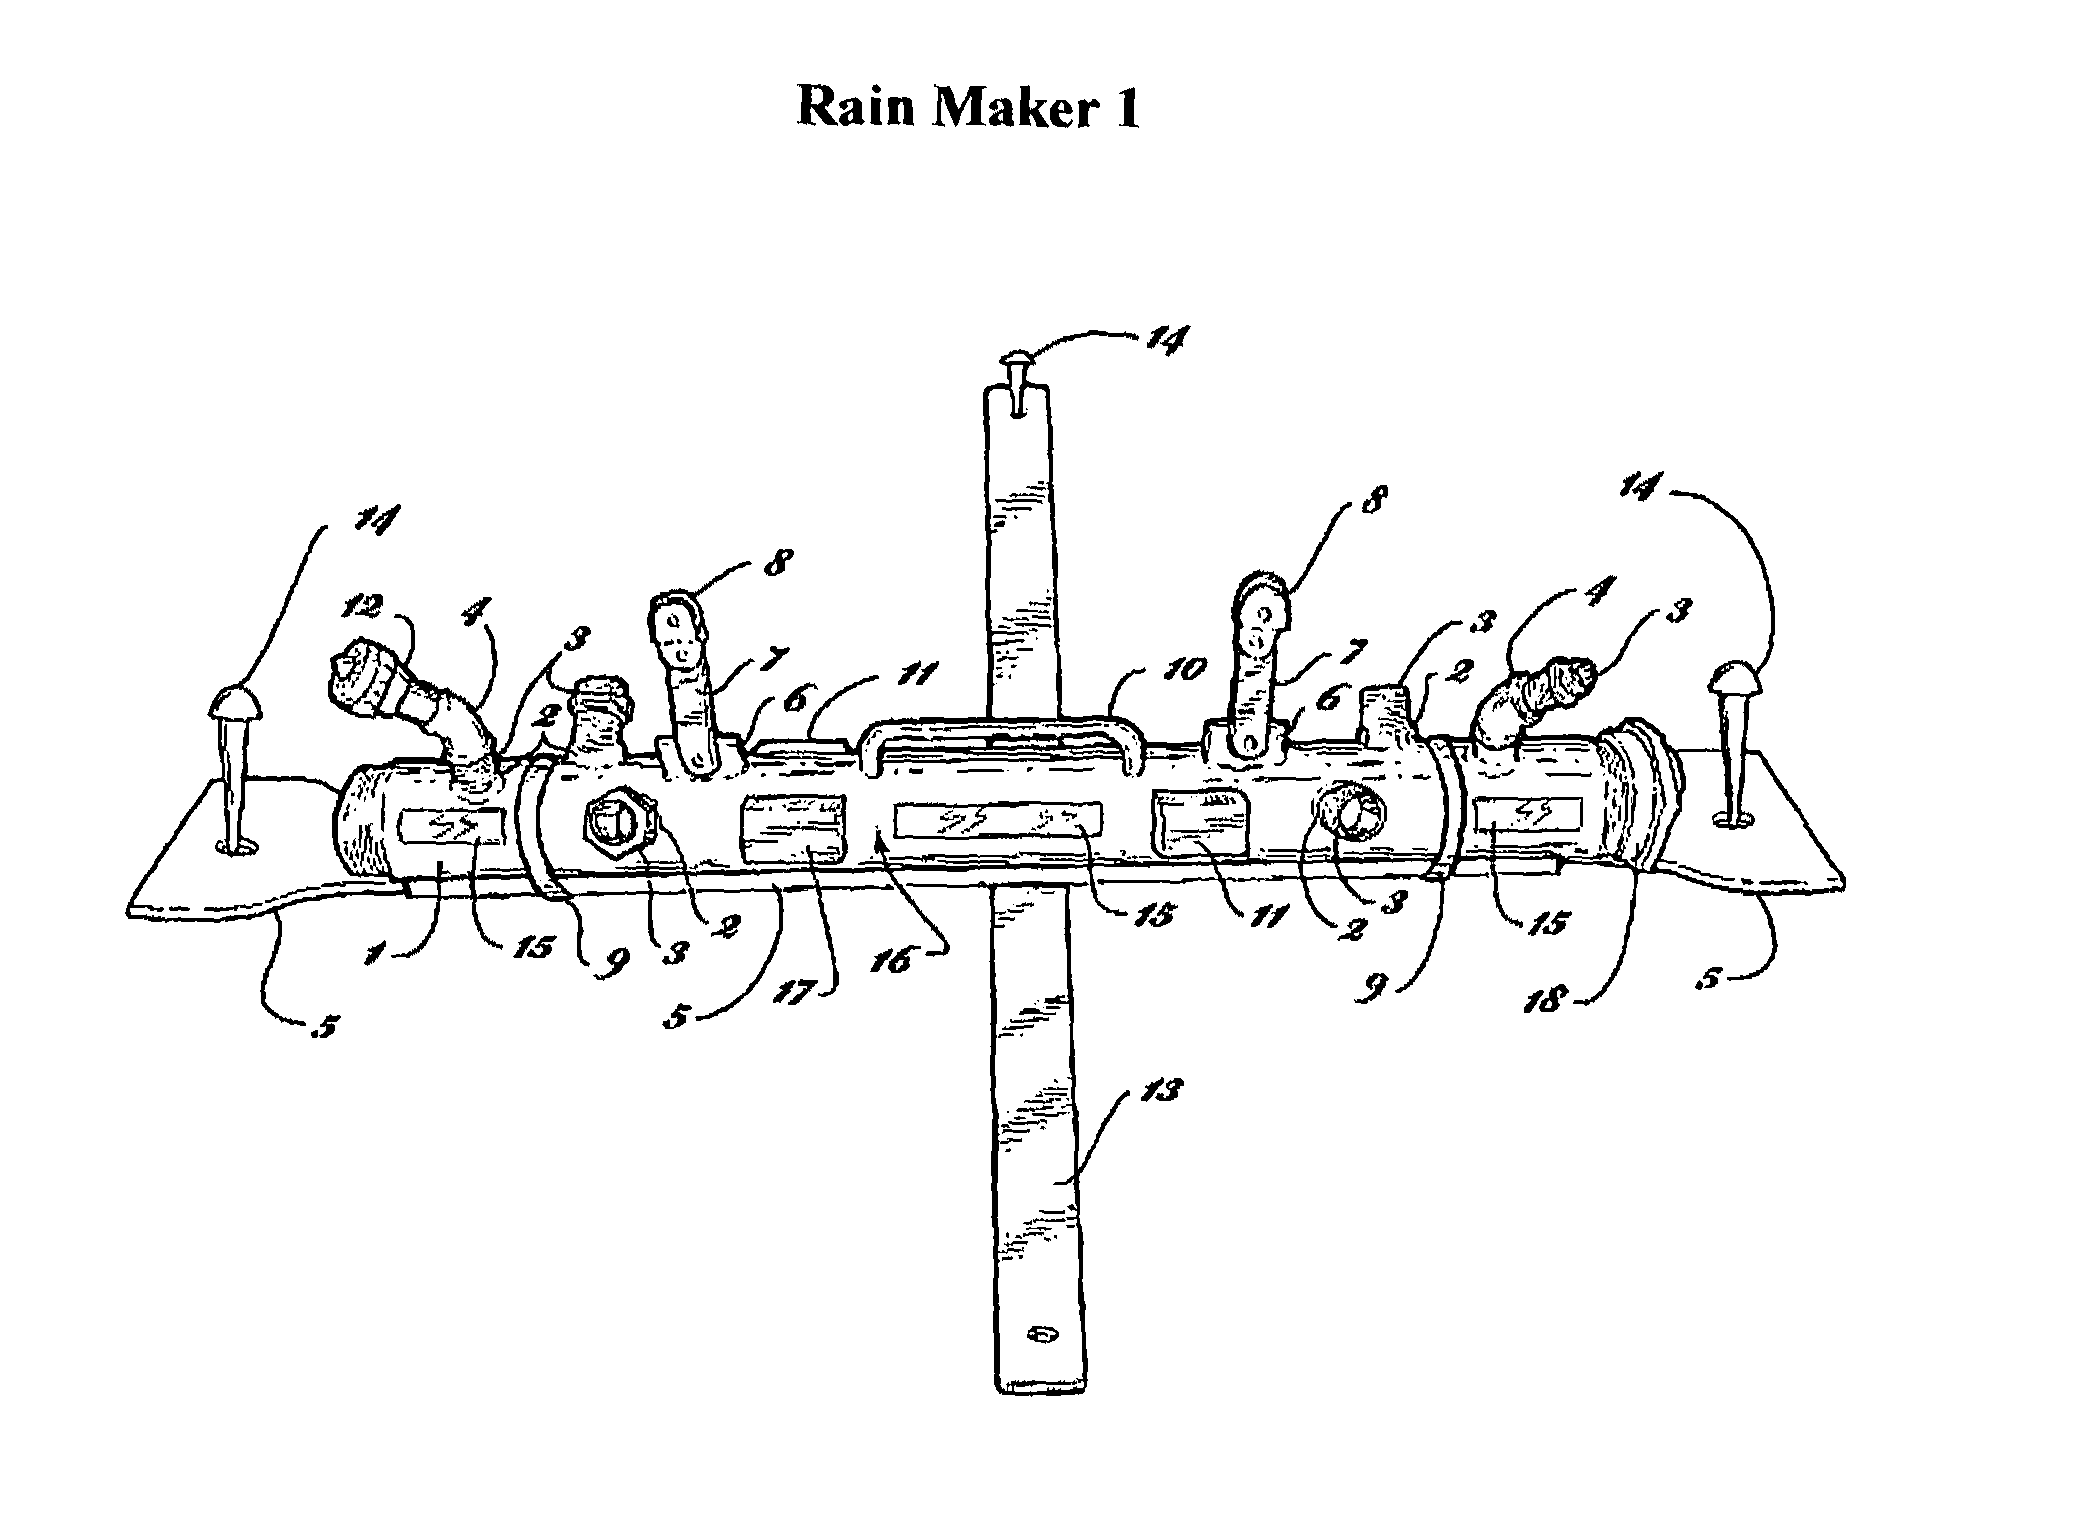 Rain maker wildfire protection and containment system